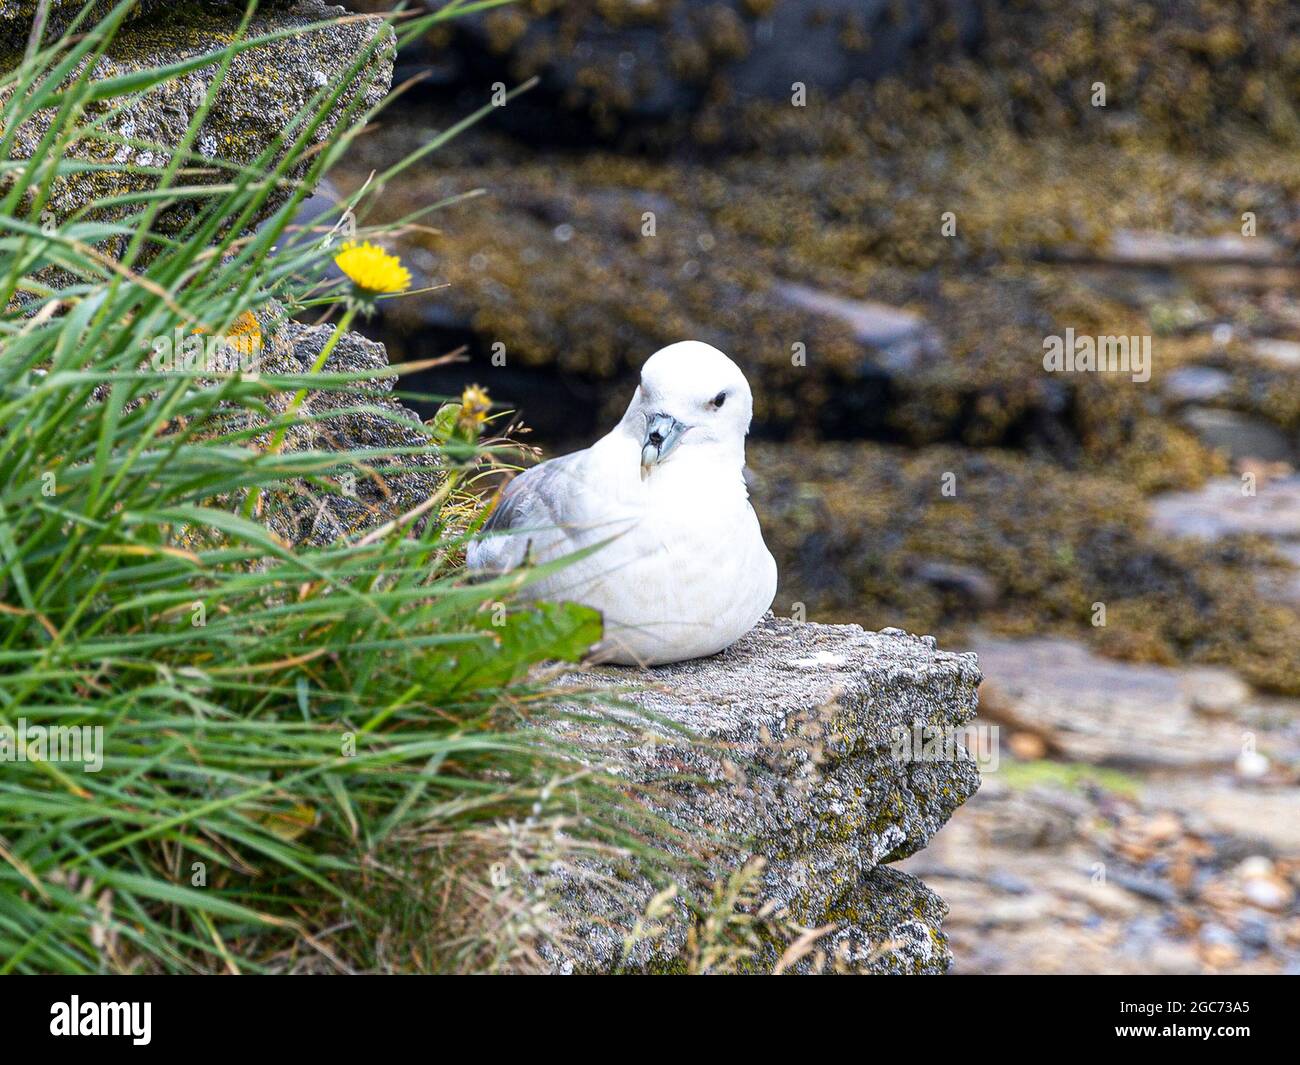 Fulmars nesting on the beach below the brochof Gurness, Orkney.  Almost gull-like, this grey and white seabird is related to the albatrosses. Stock Photo